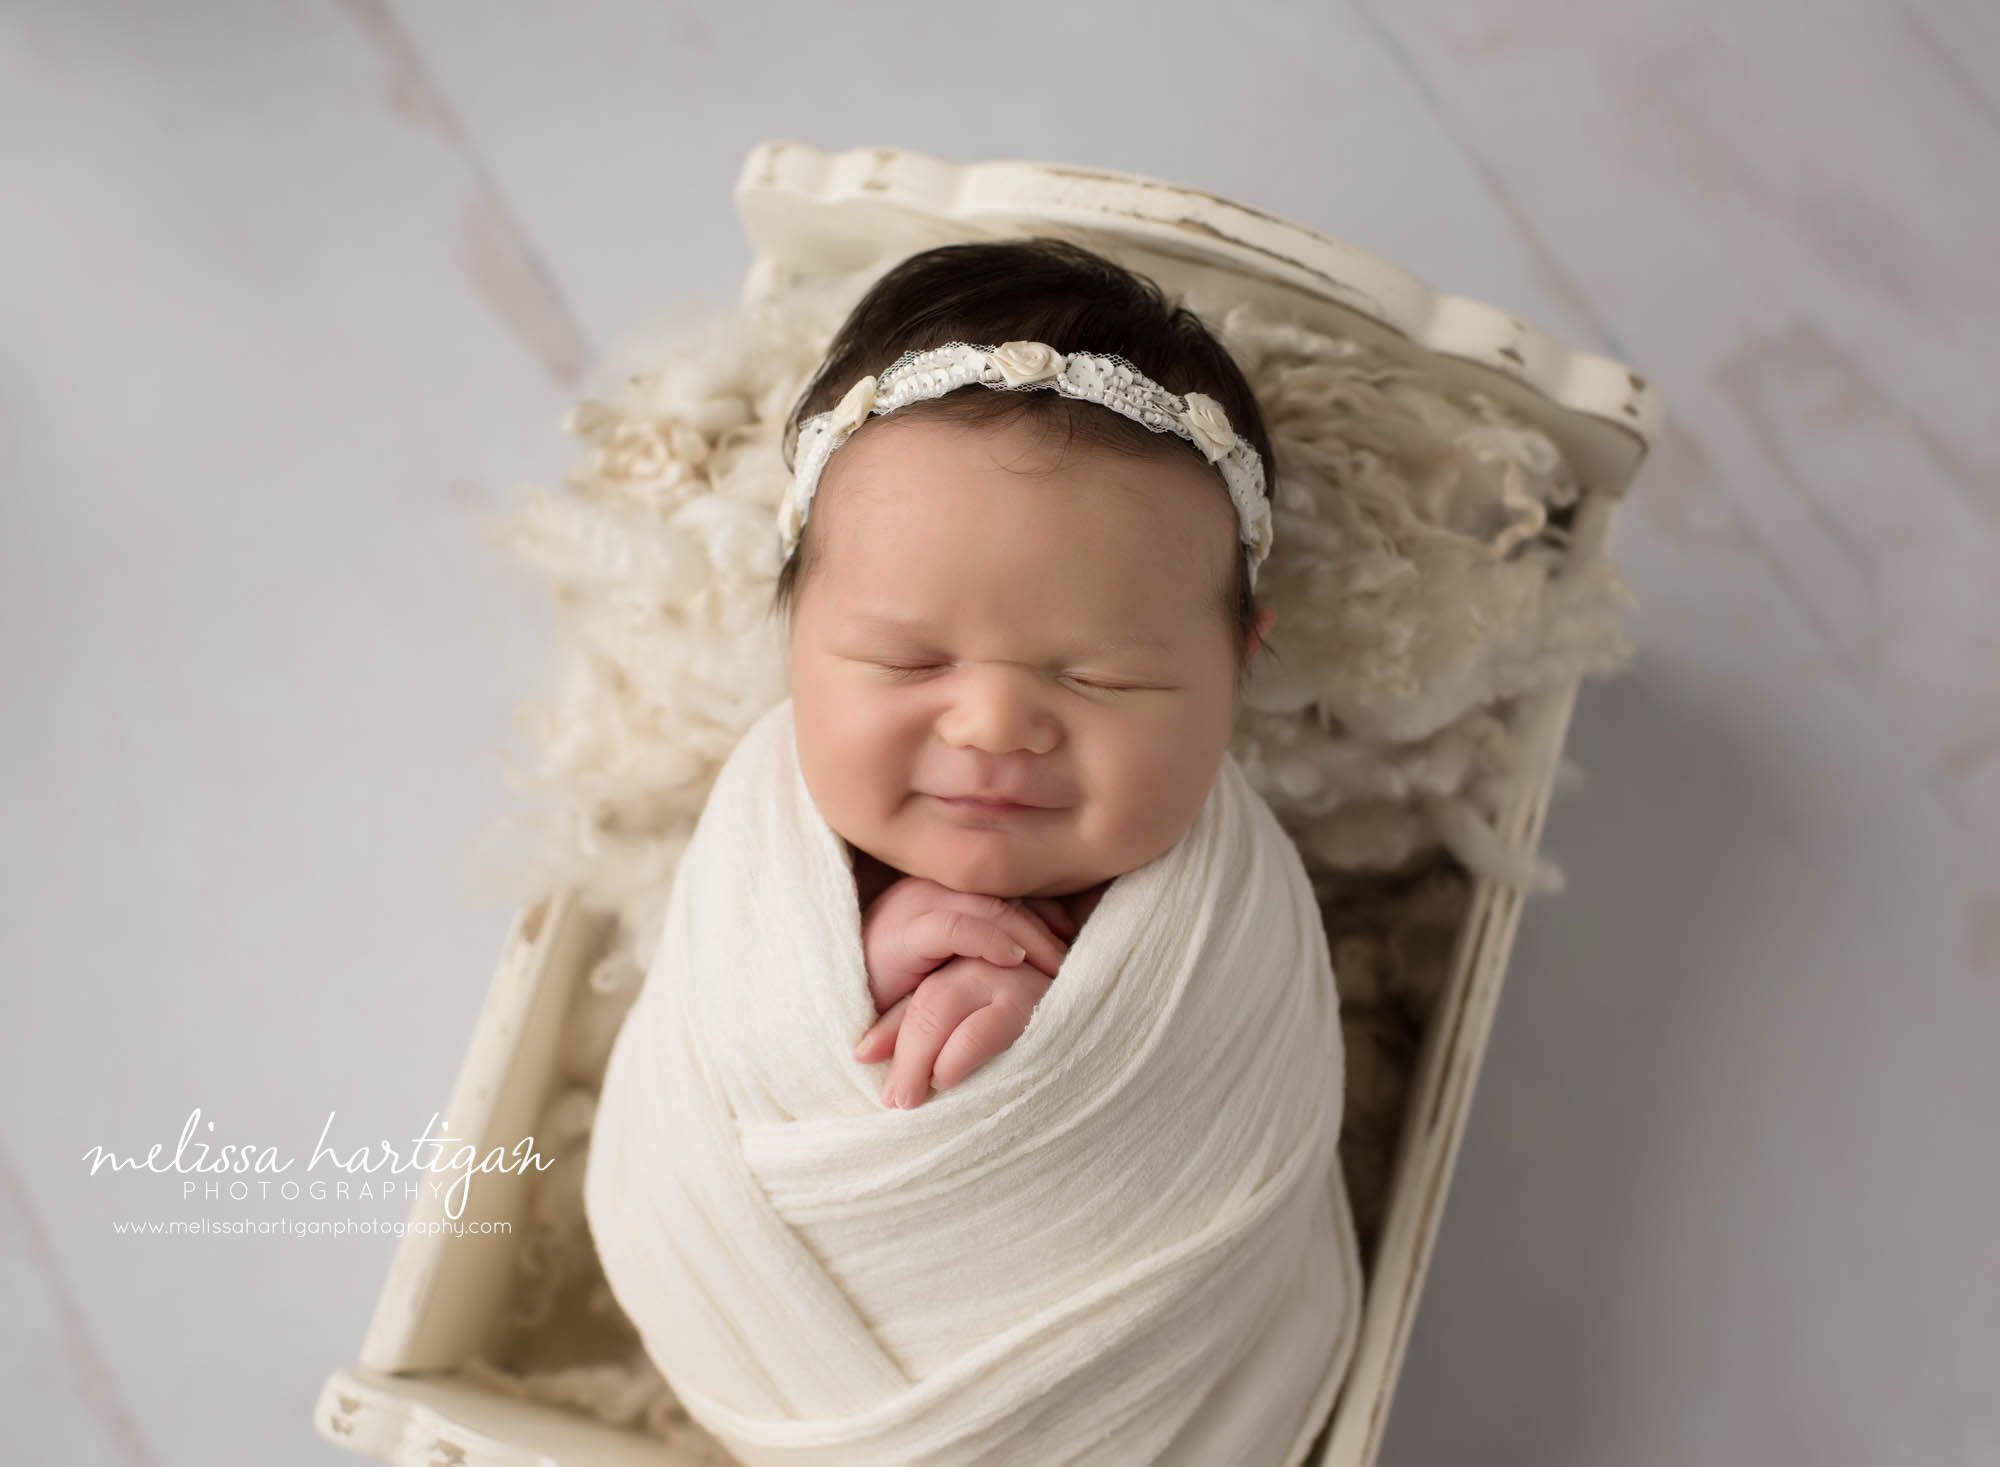 Newborn baby girl smiling wrappe din cream wrap posed in wooden newborn craddle prop